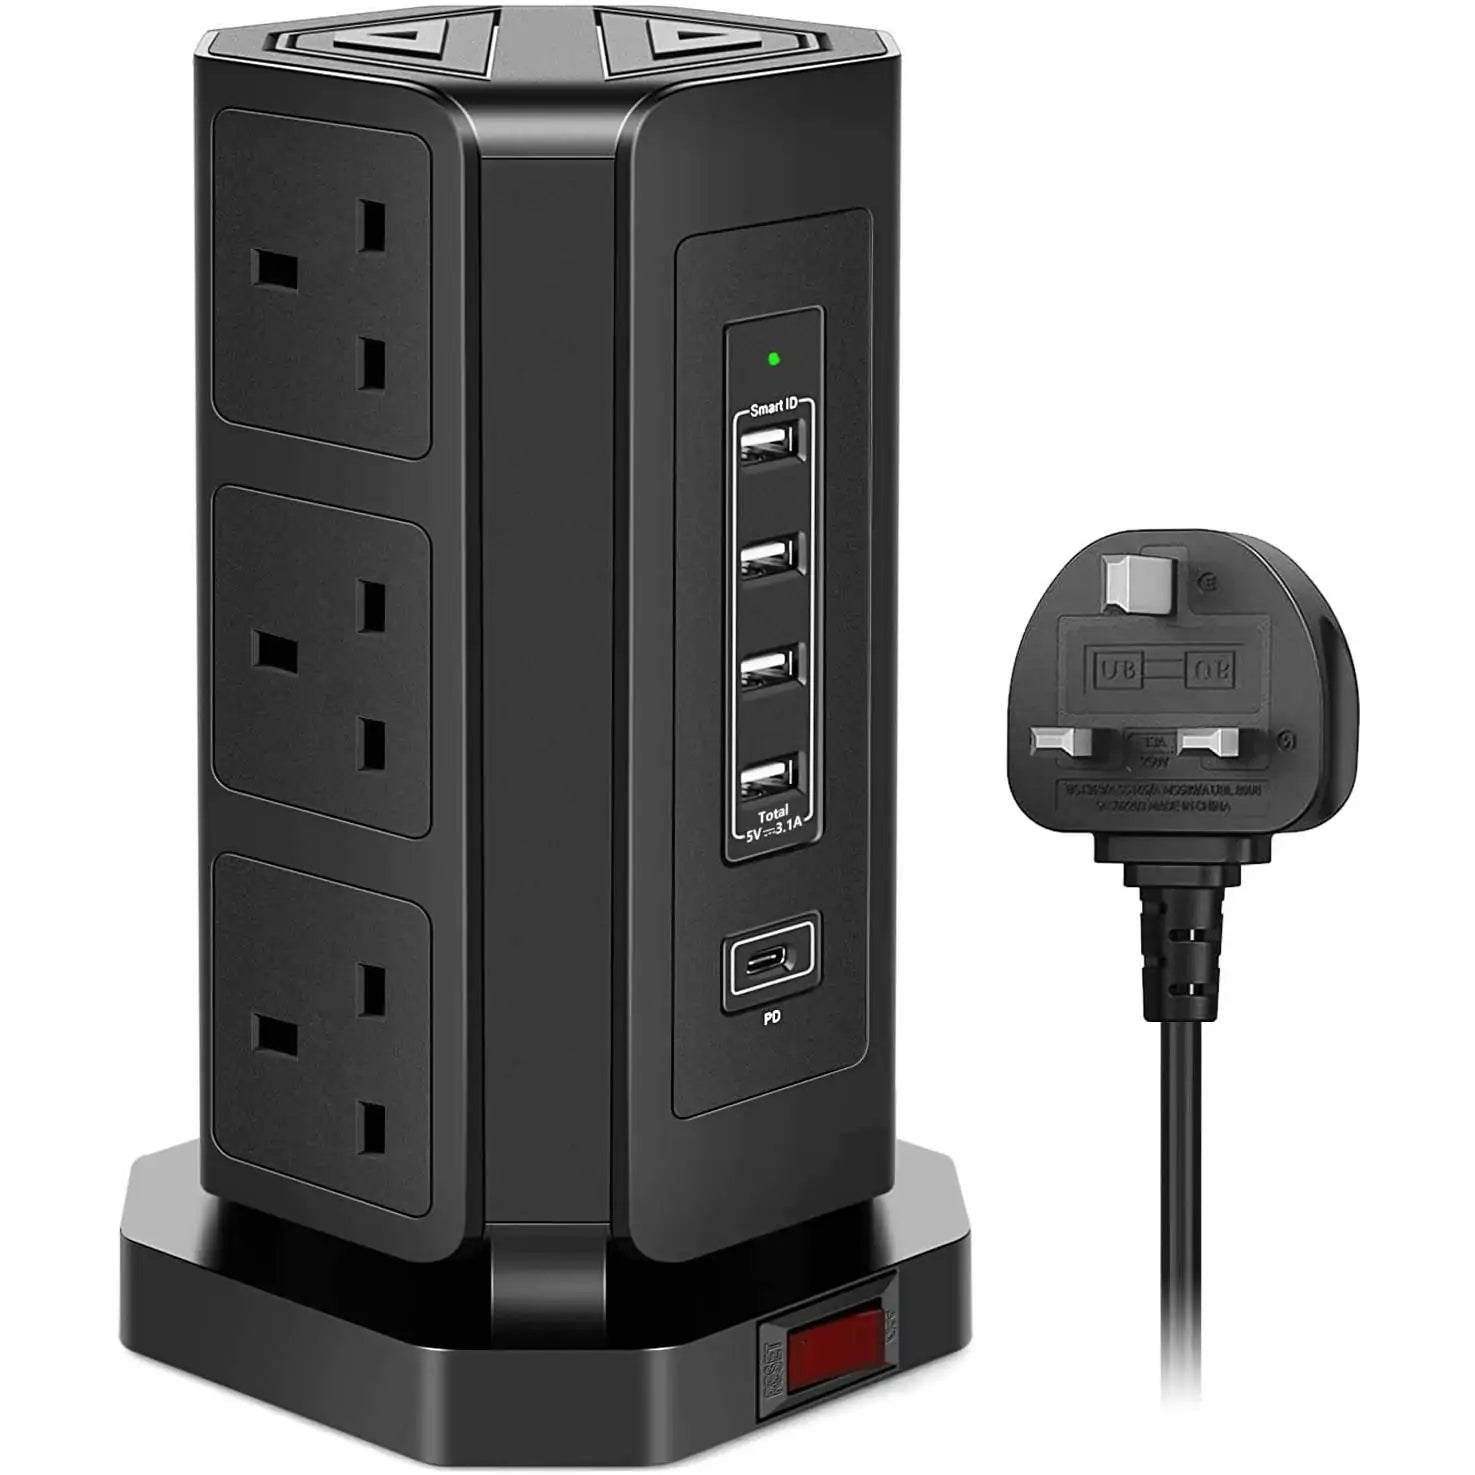 SS36 Outdoor Smart WiFi Plug Remote Control Outlet with 2 Sockets